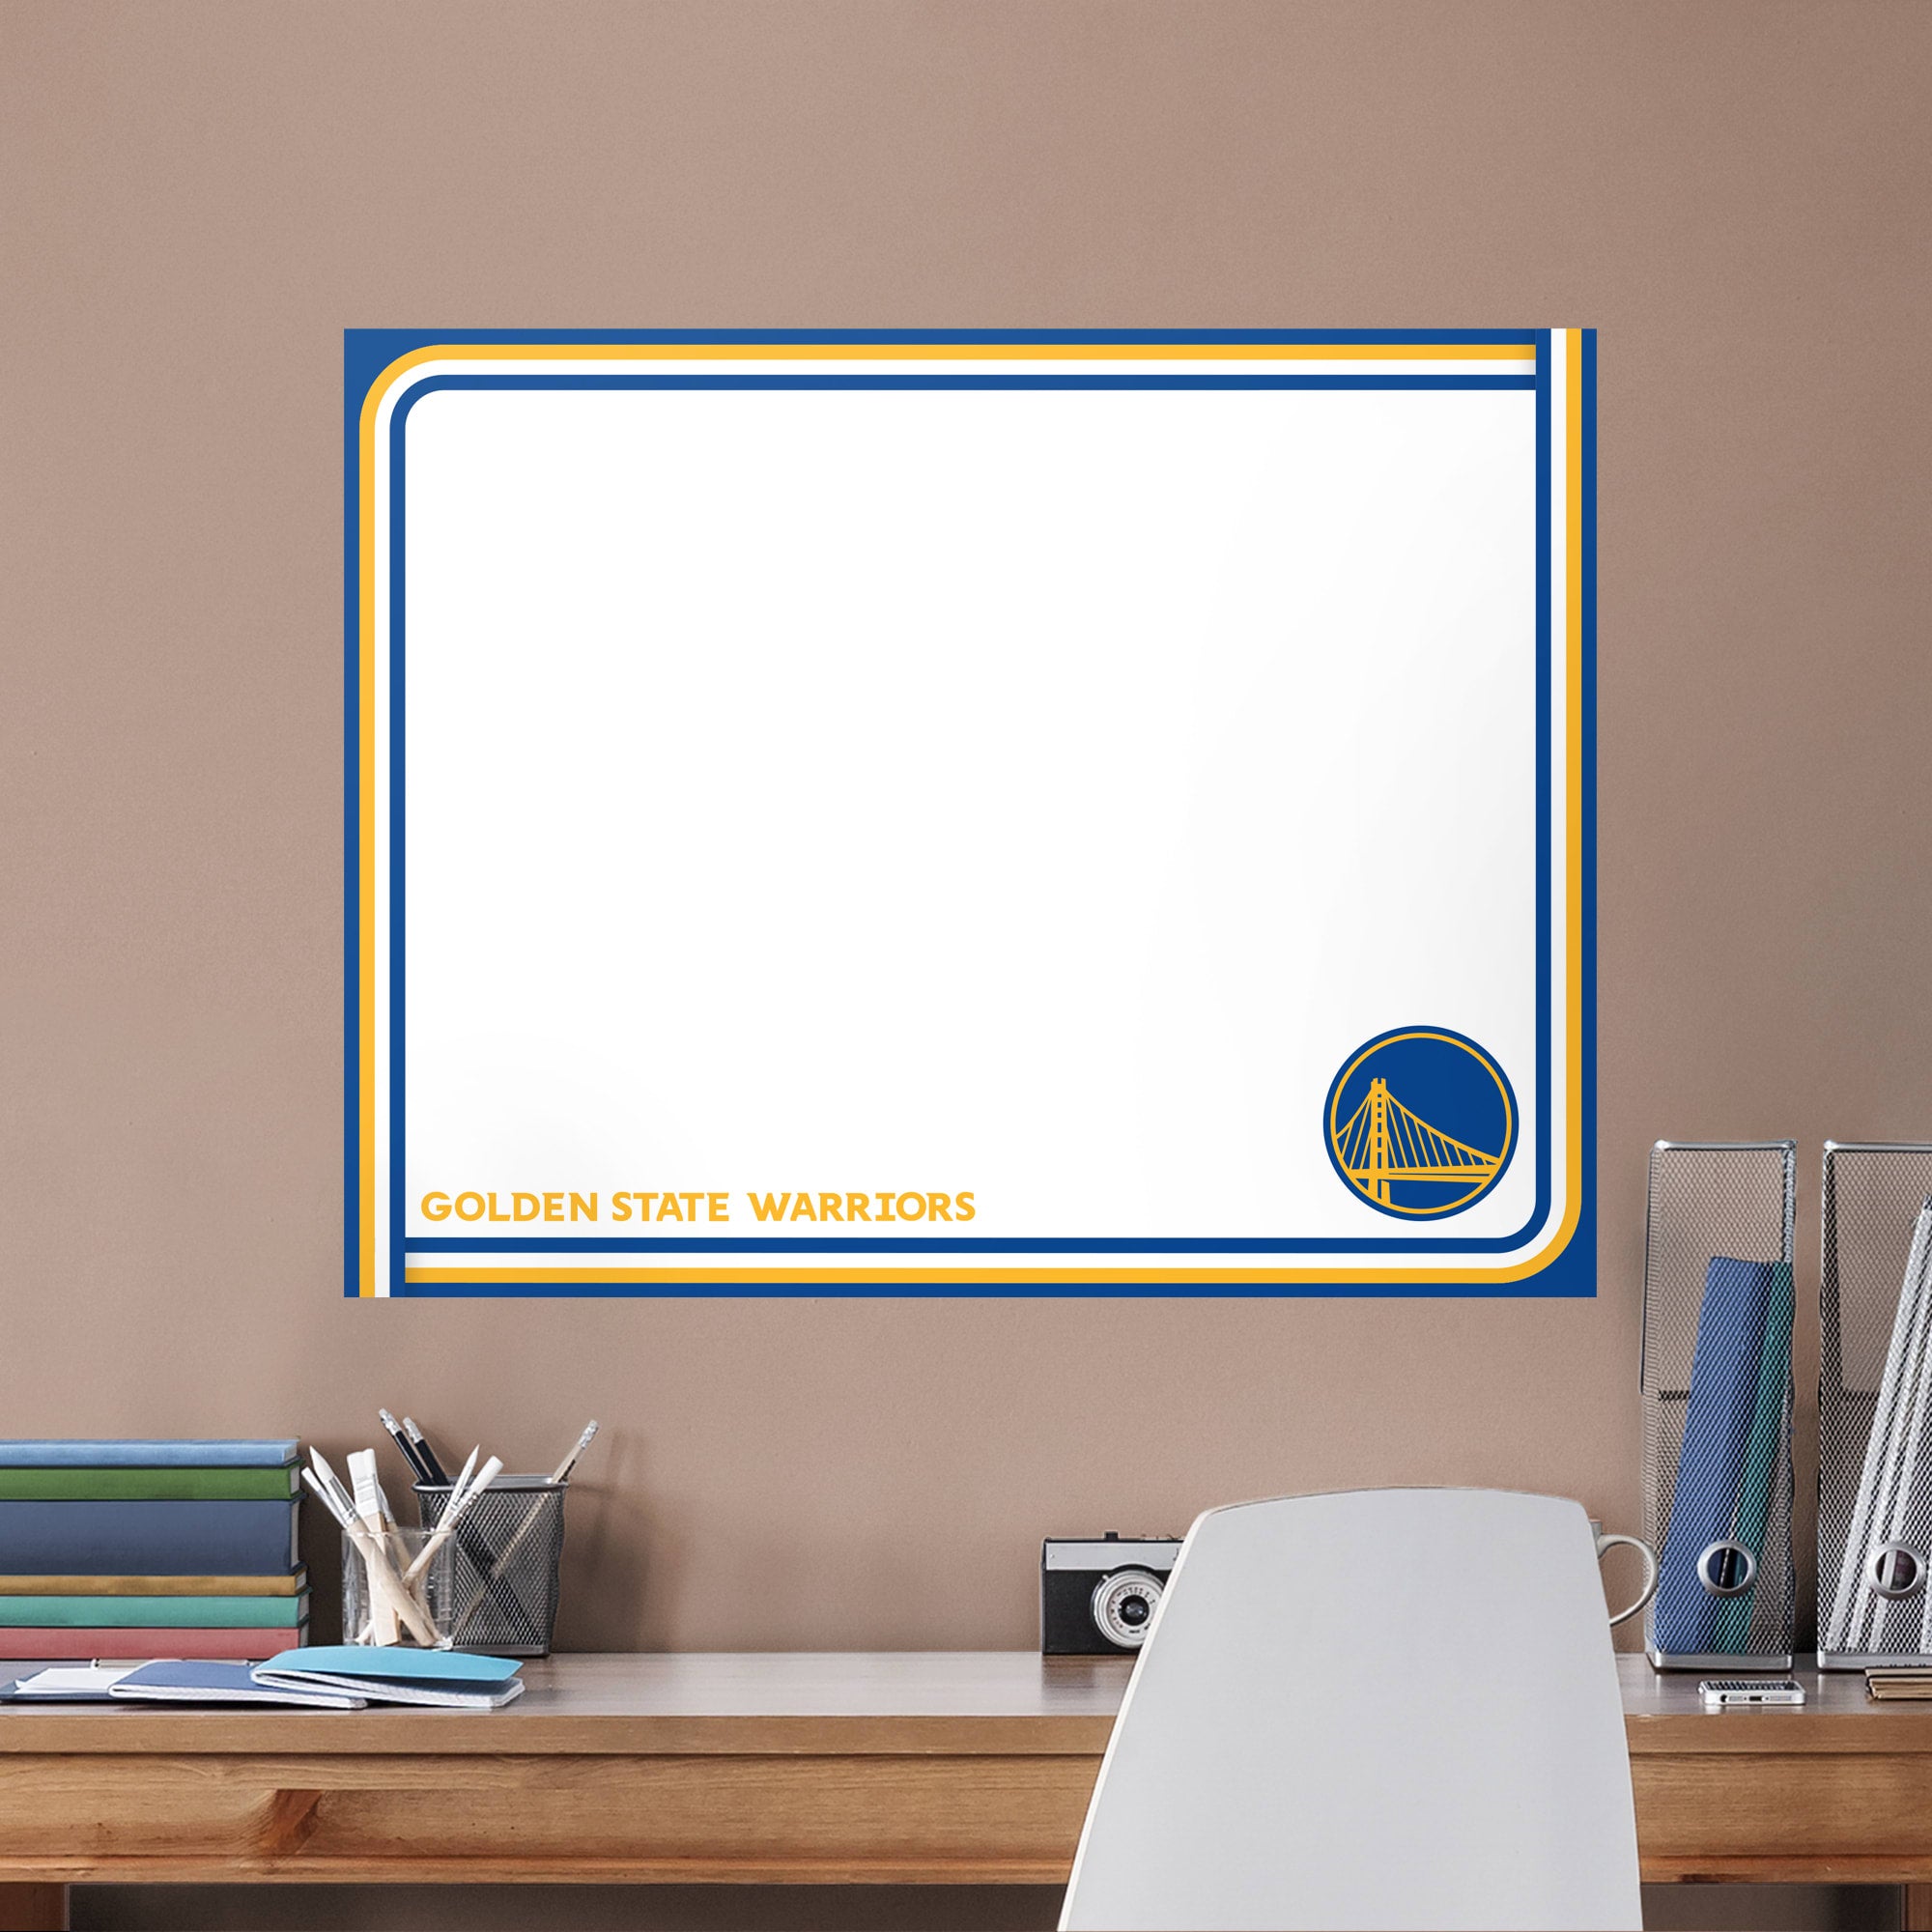 Golden State Warriors for Golden State Warriors: Dry Erase Whiteboard - Officially Licensed NBA Removable Wall Decal XL by Fathe